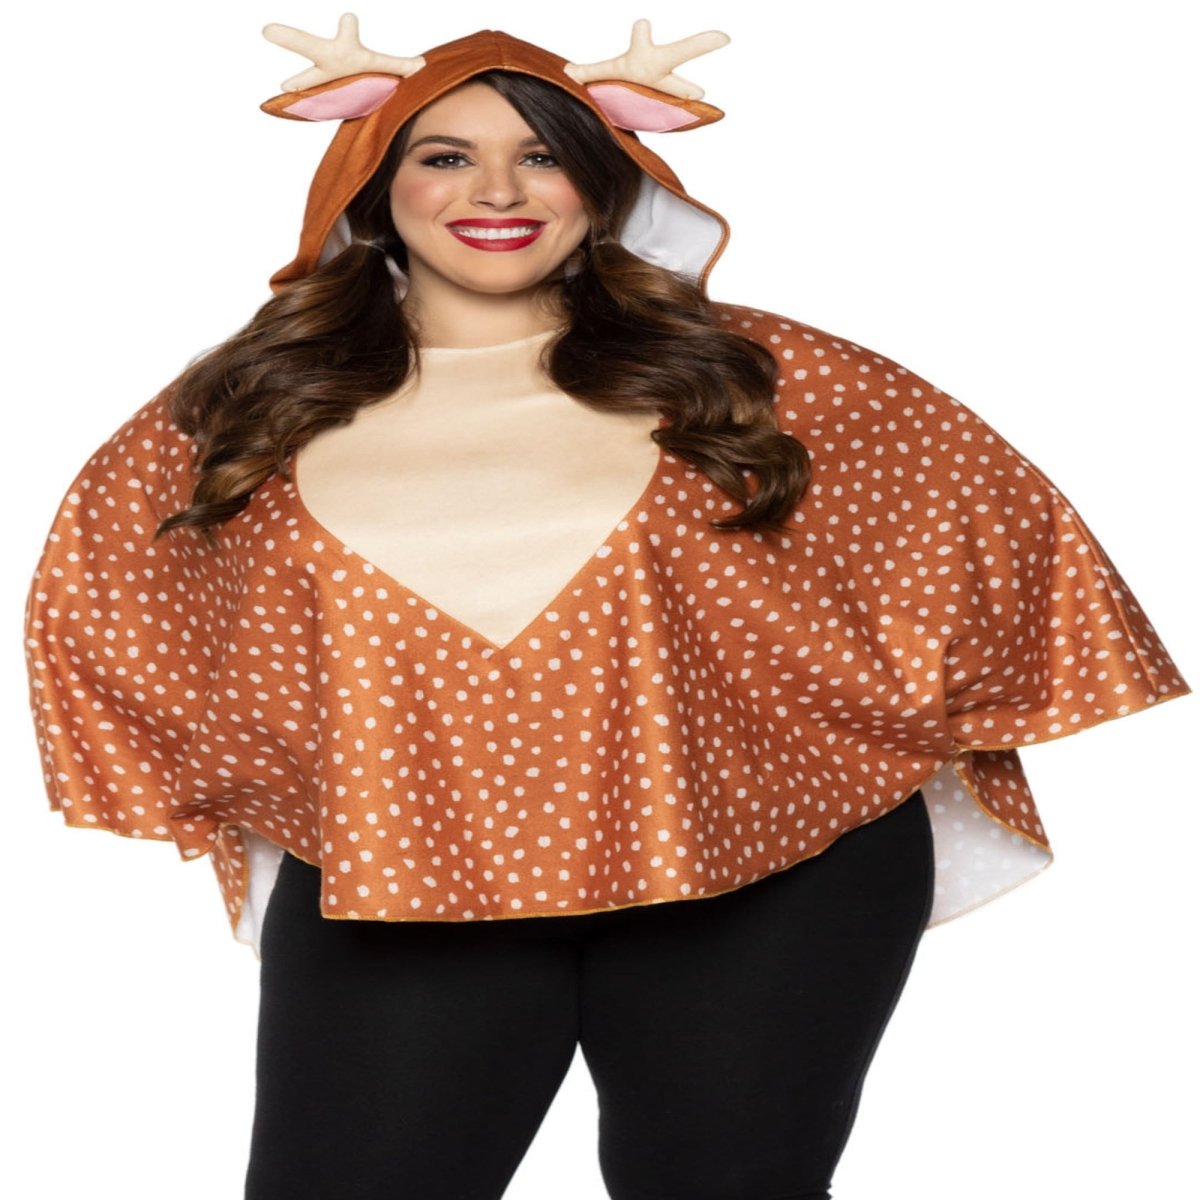 Fawn Poncho Animal Costume With Hood - worldclasscostumes